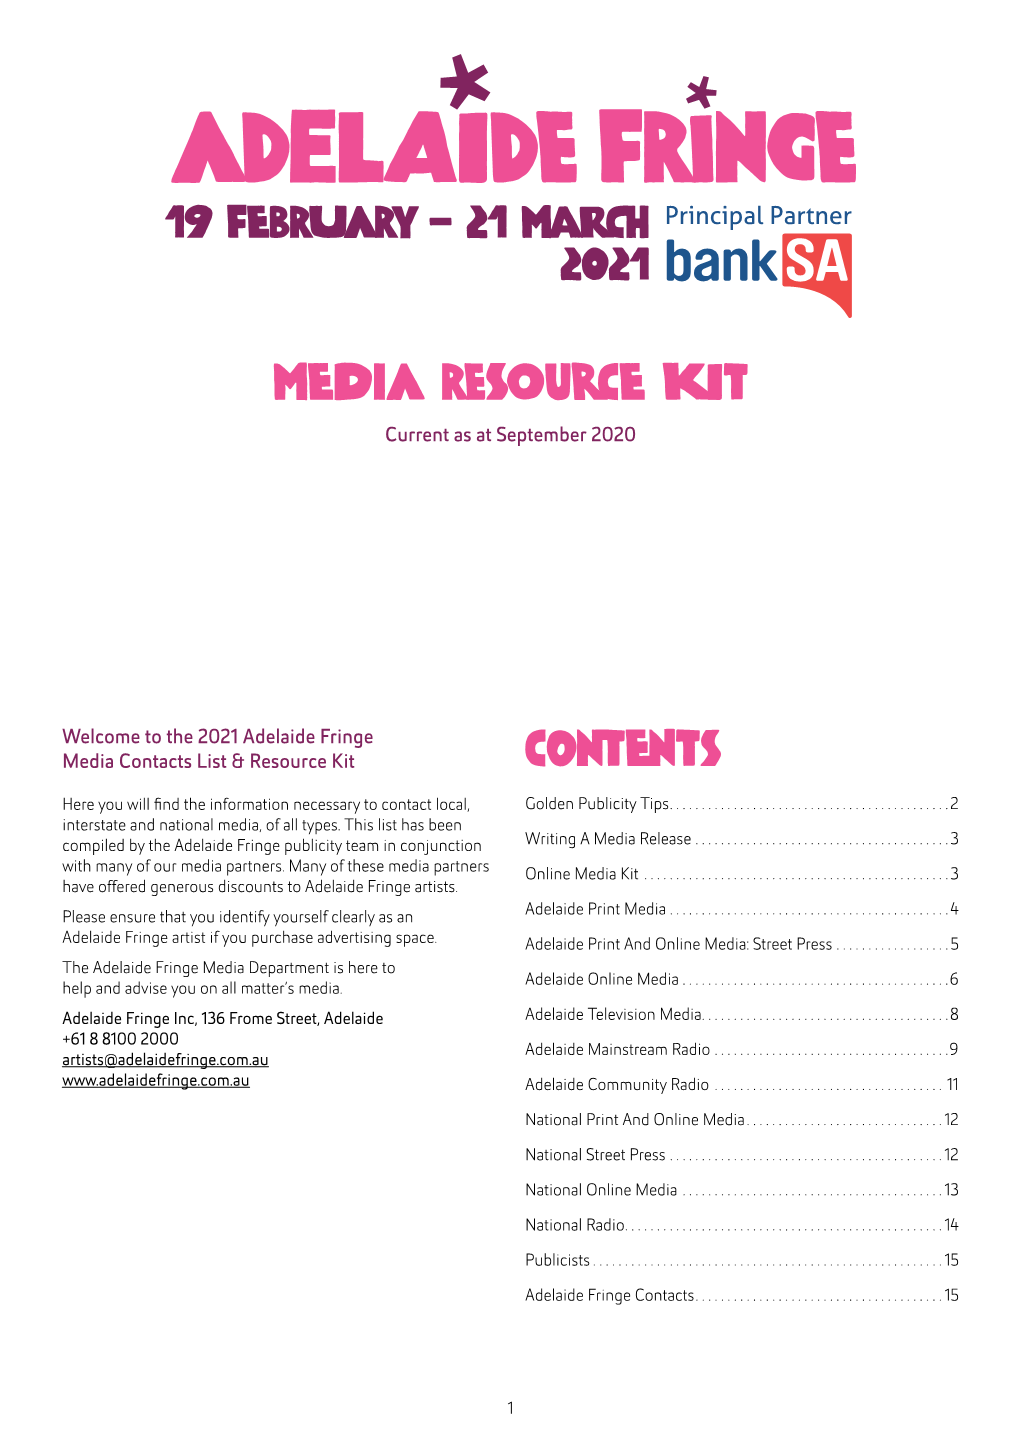 Media Resource Kit Contents